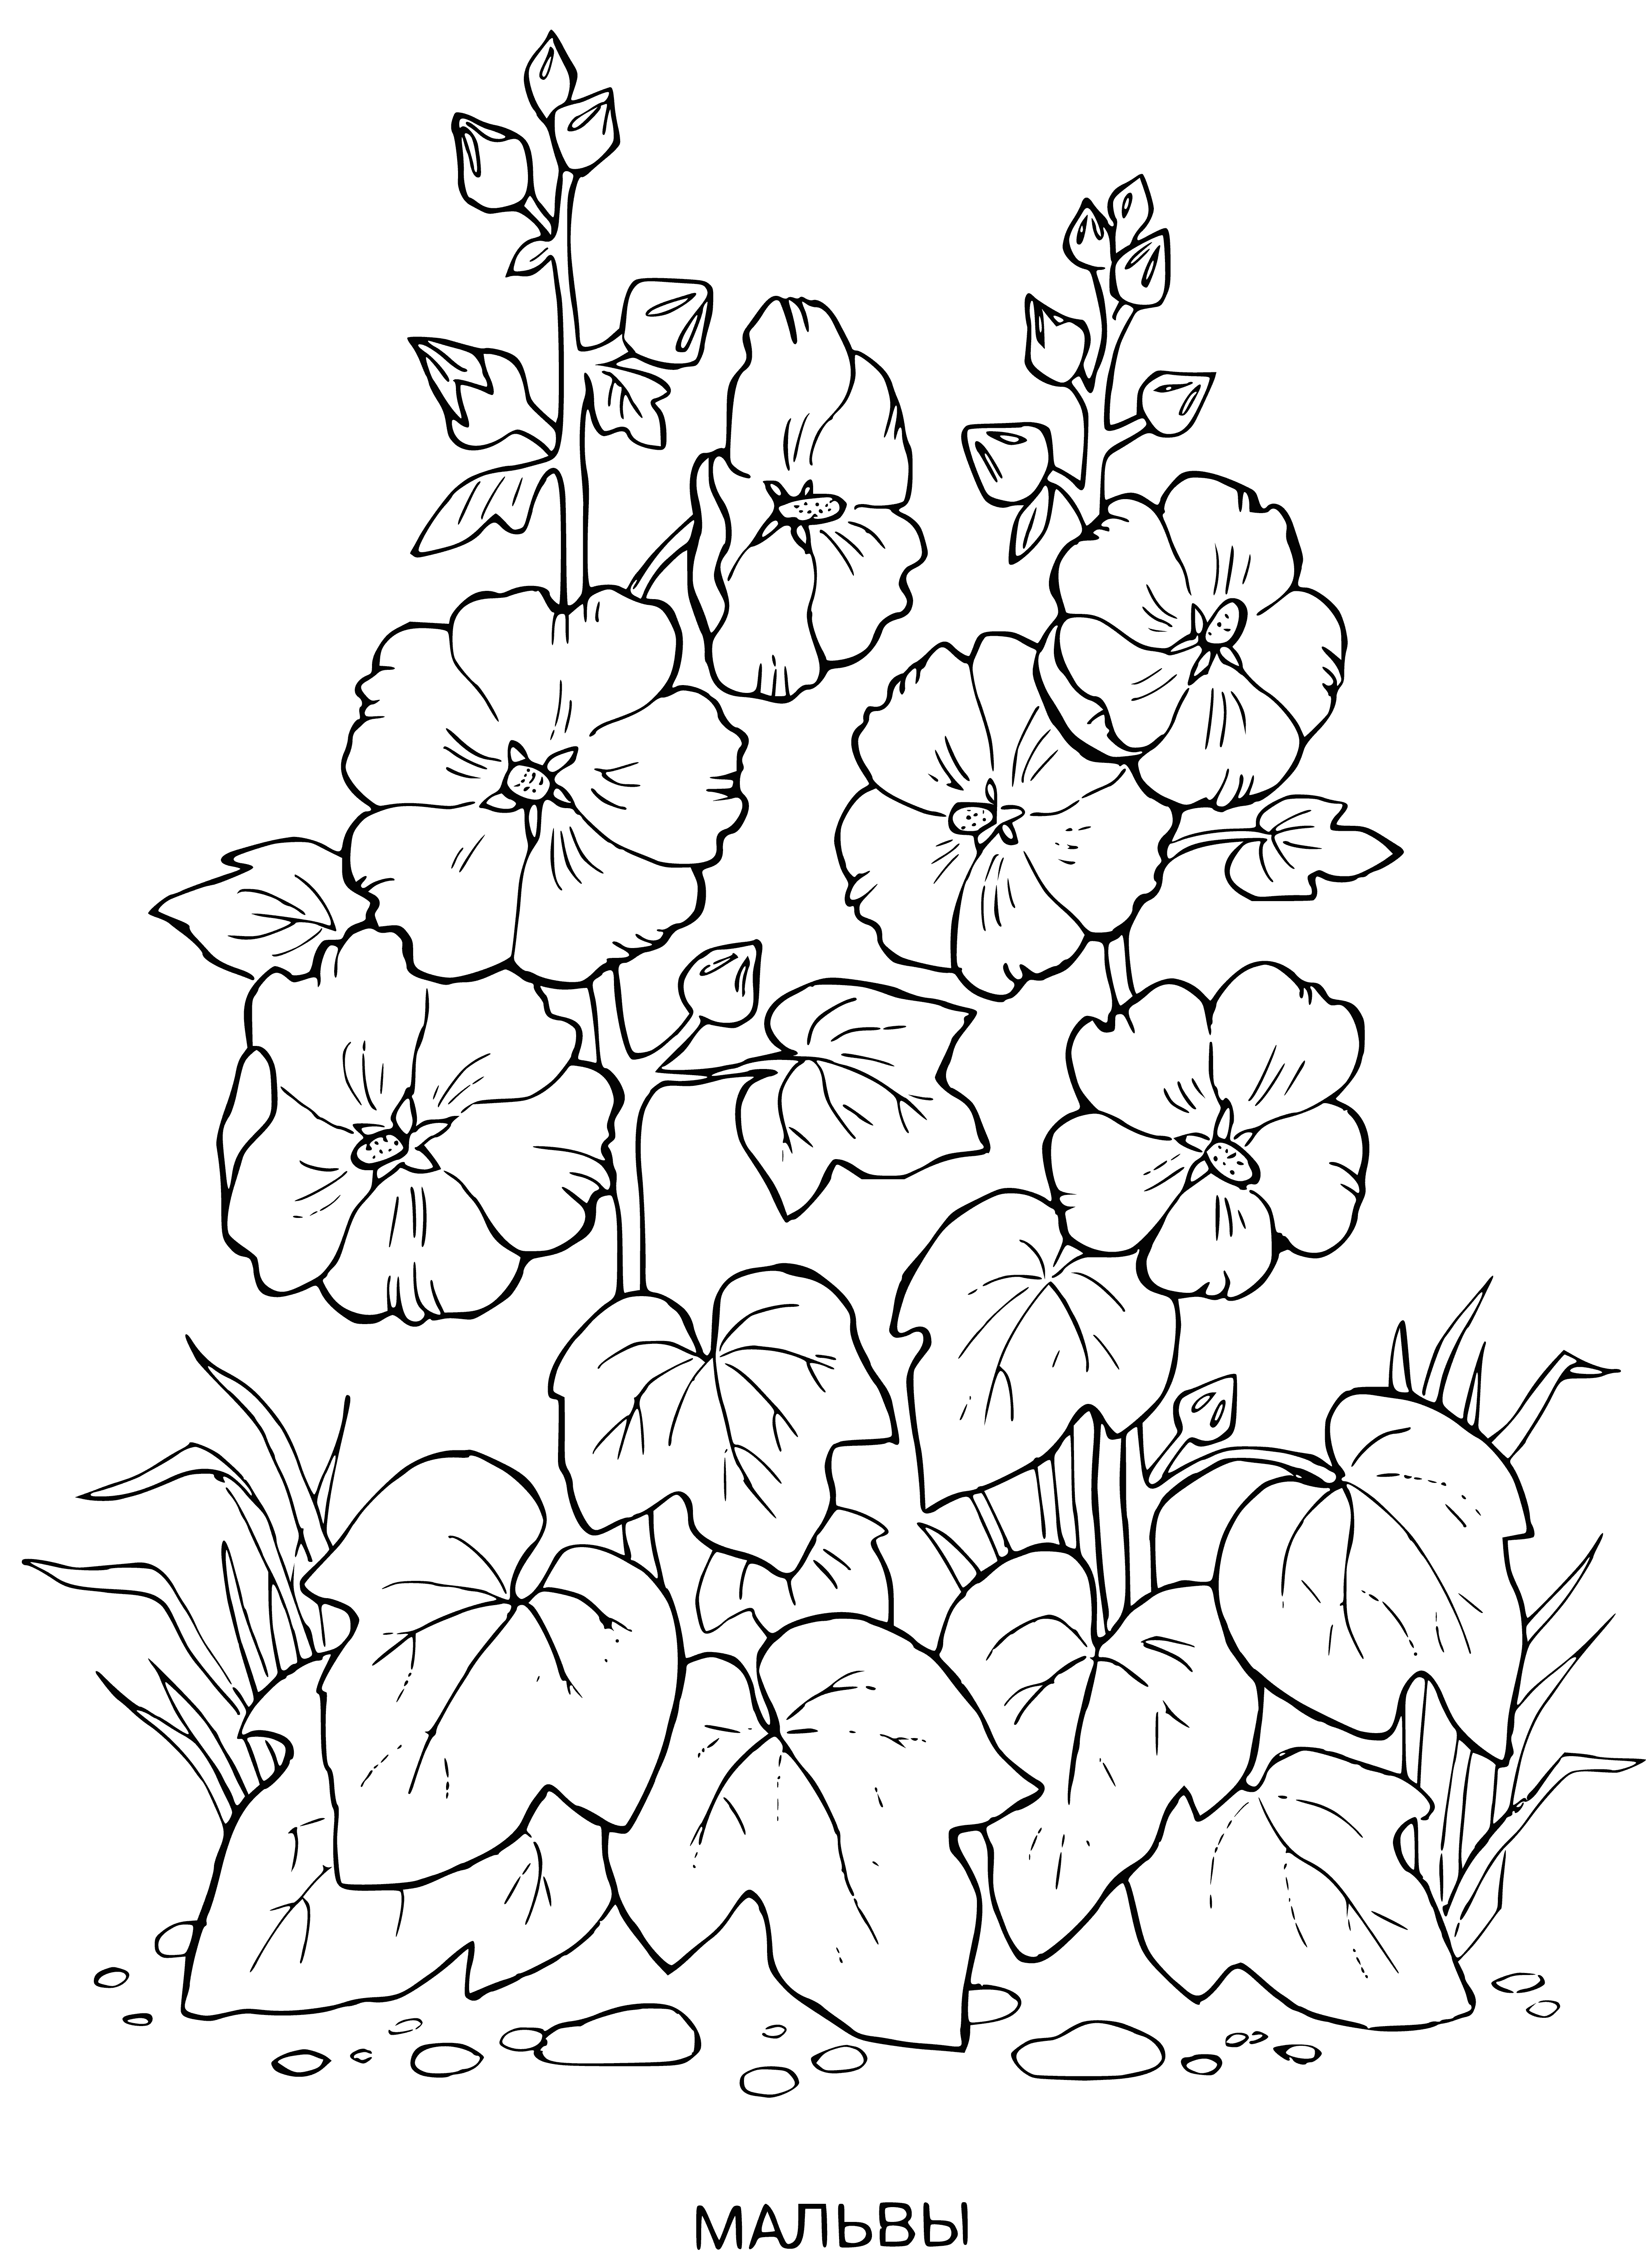 Mallow coloring page